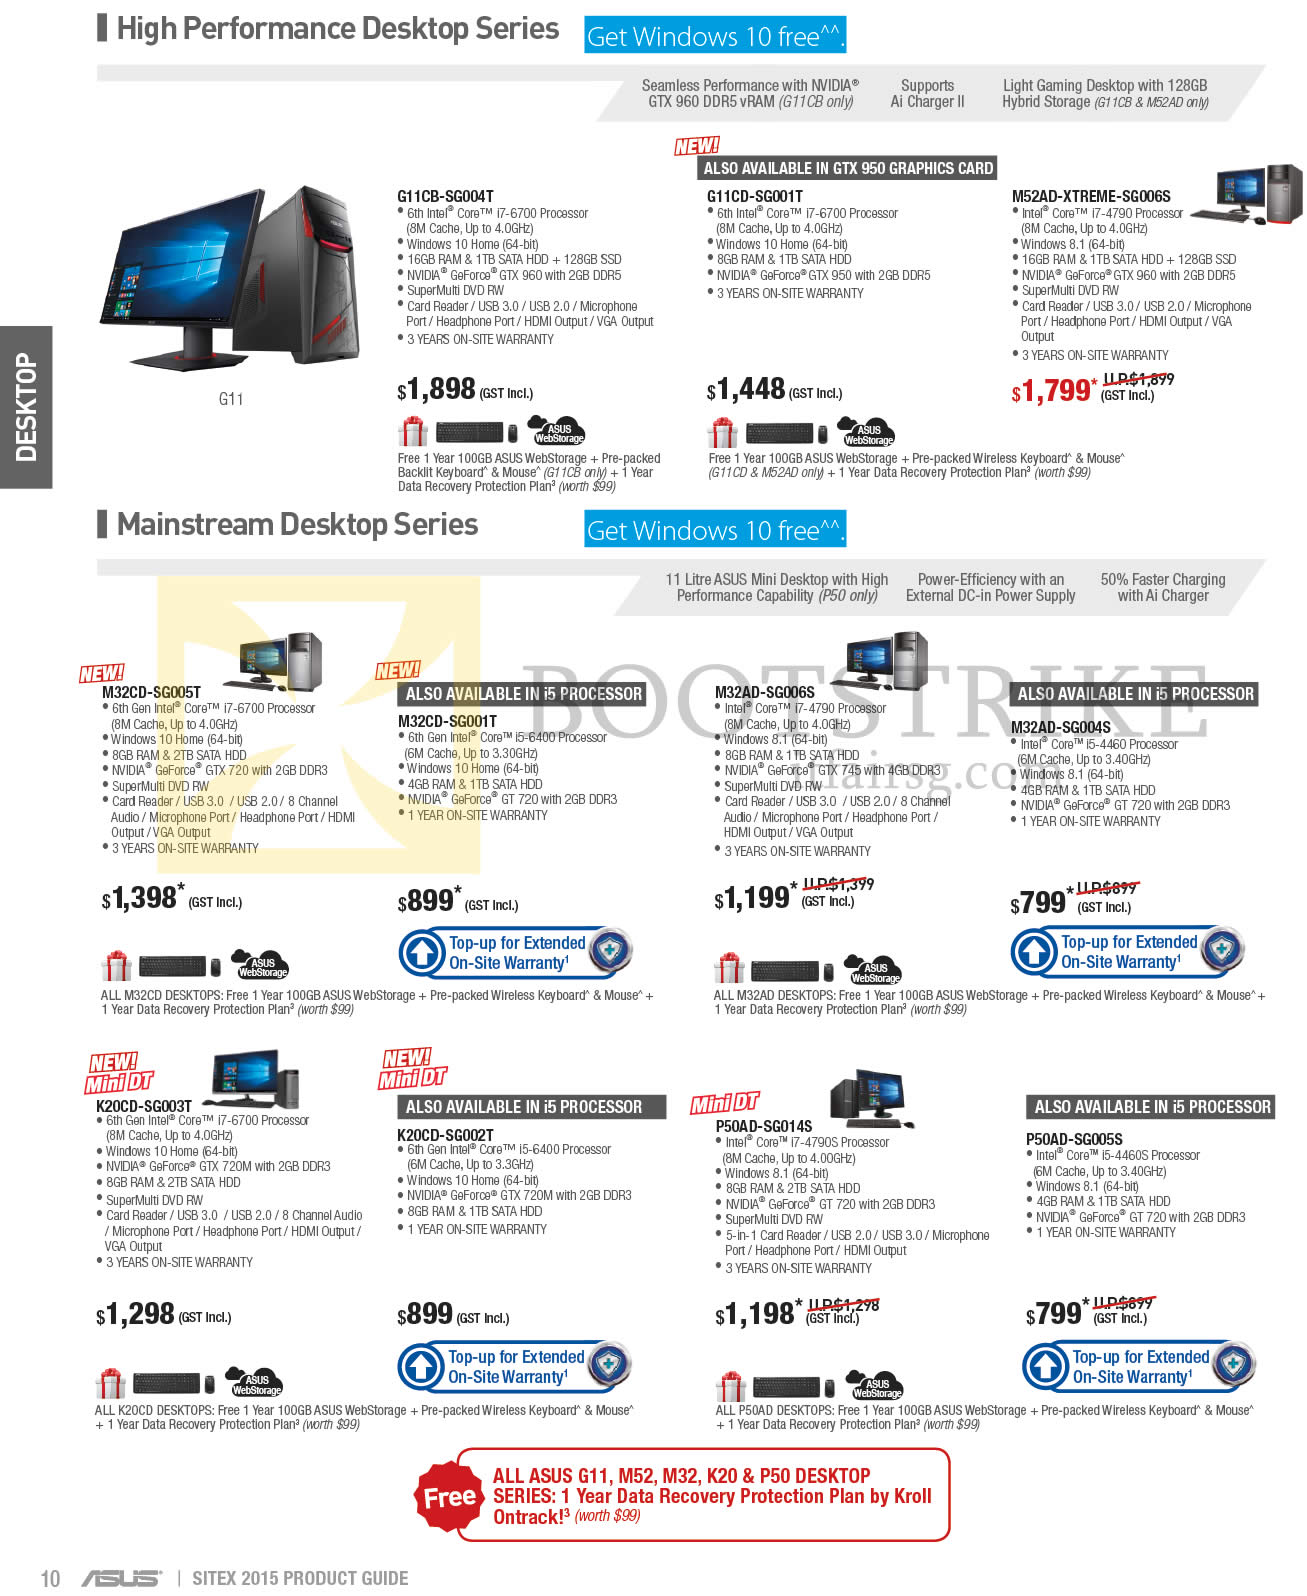 SITEX 2015 price list image brochure of ASUS Desktop PCs, G11CB-SG004T, G11CD-SG001T, M52AD-XTREME-SG006S, M32CD-SG005T, M32CD-SG001T, M32AD-SG006S, K20CD-SG003T, K20CD-SG002T, P50AD-SG014S, P50AD-SG005S